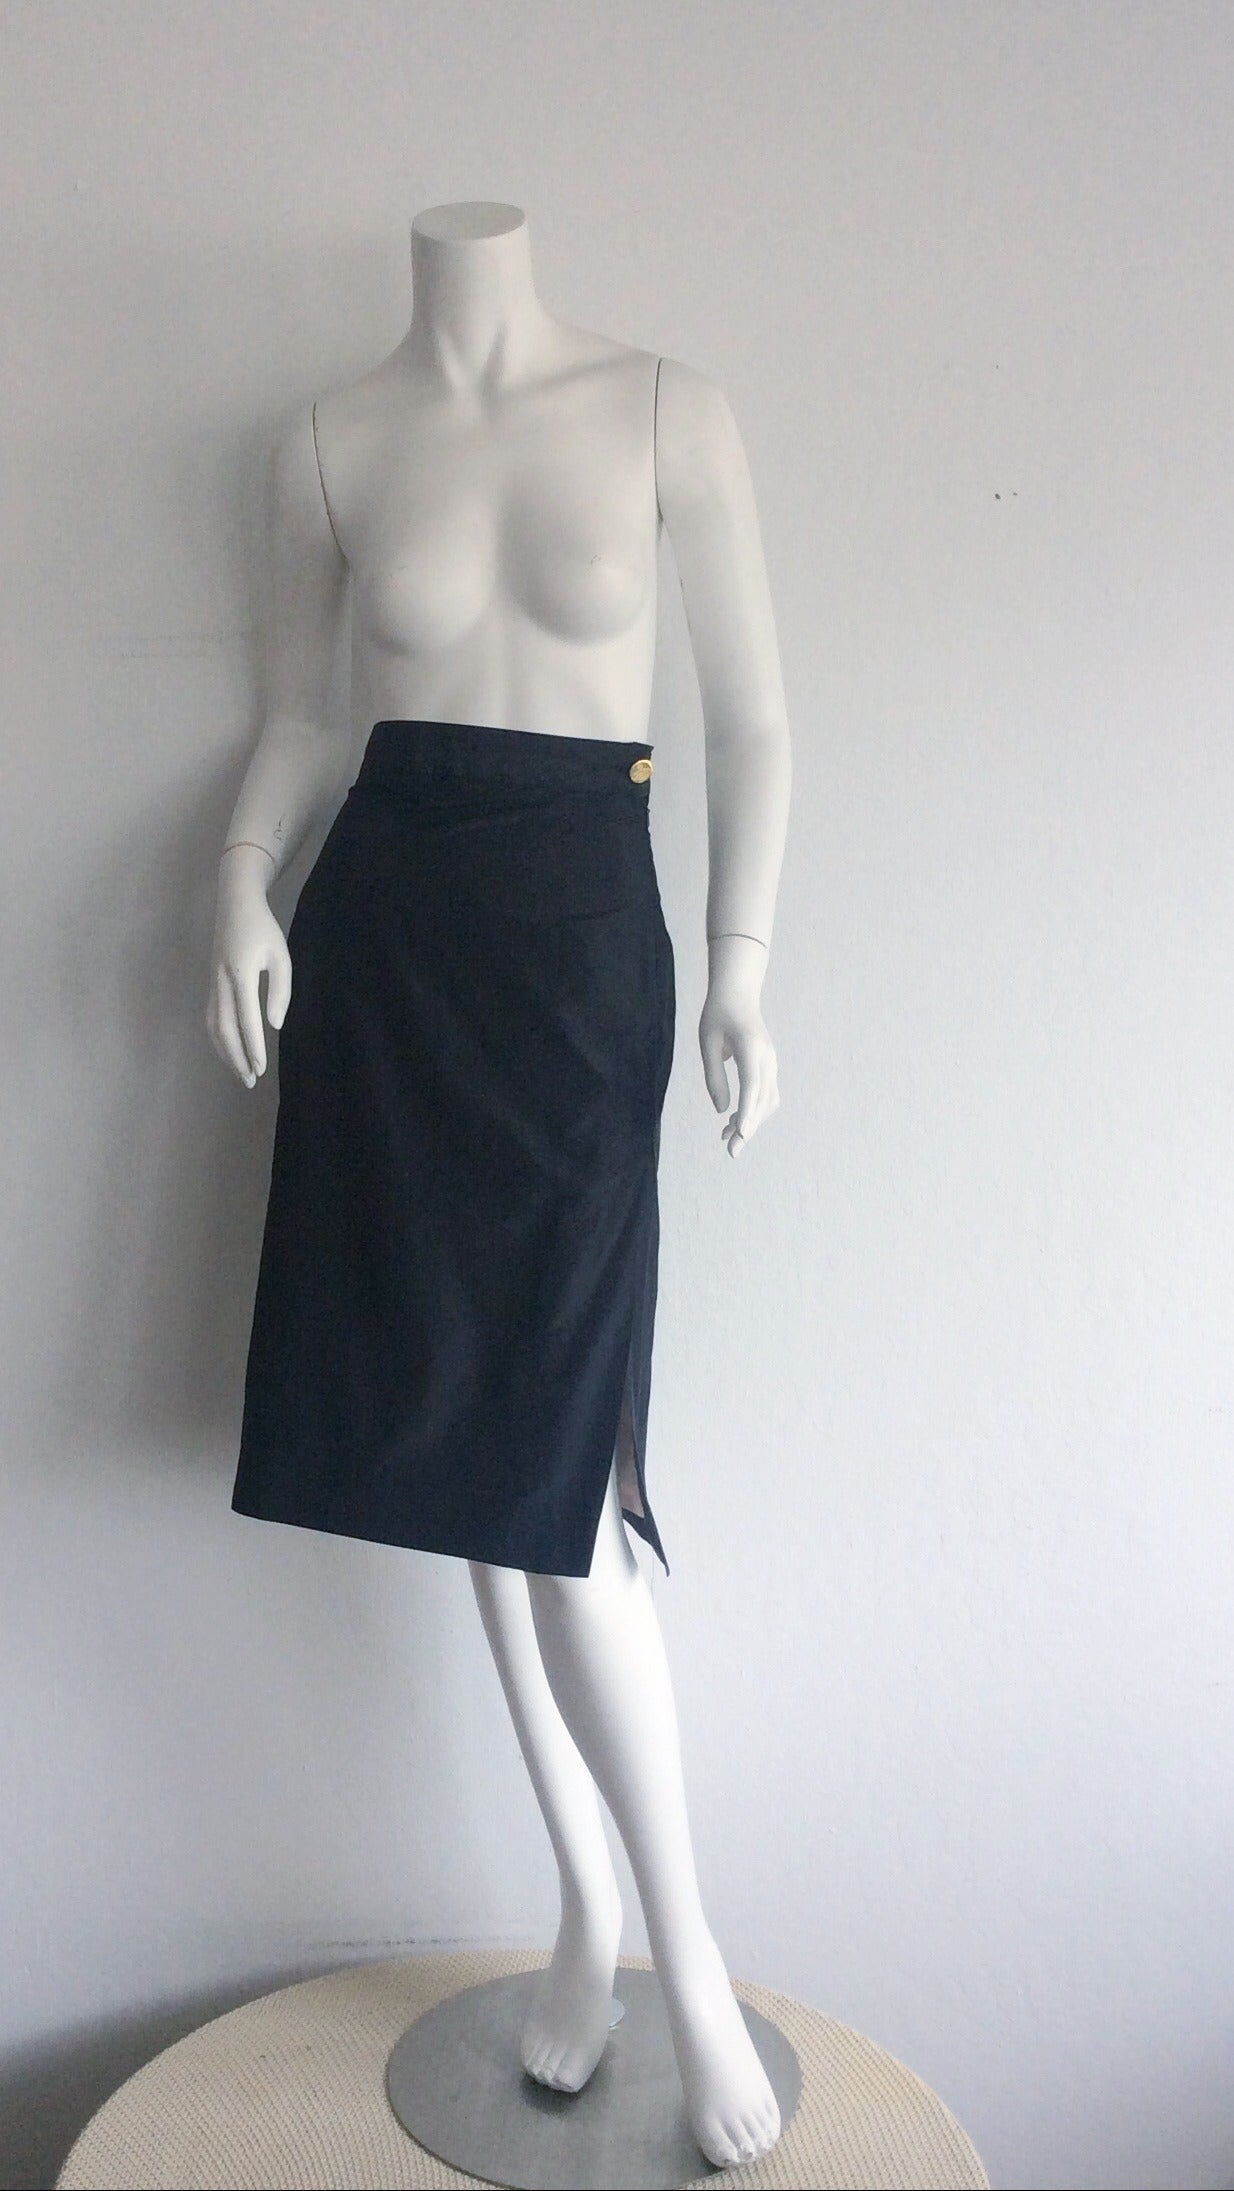 Beuatiful 1990s Vivienne Westwood 'Gold Label' high waisted black silk skirt! Classic piece with a slight, signature Westwood 'edge.' Features gold logo 